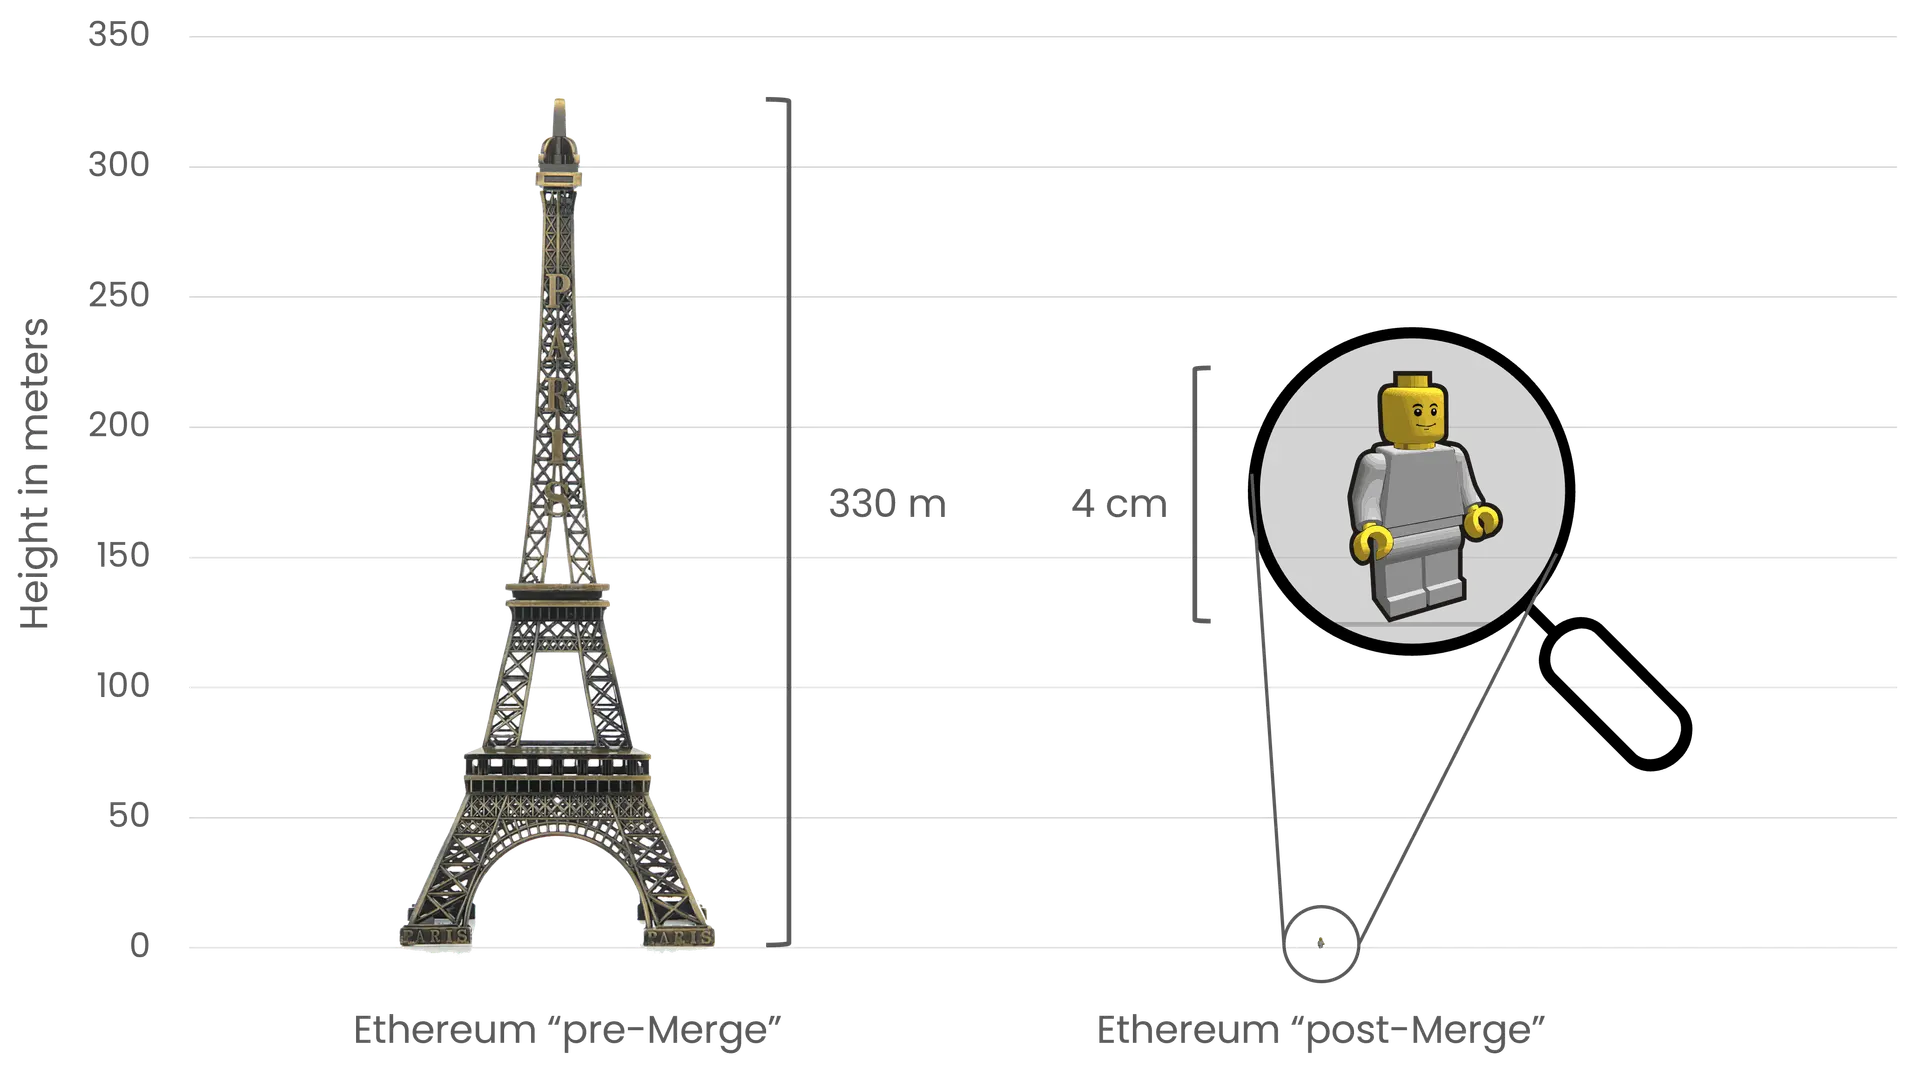 Comparing Ethereum's energy consumption pre- and post-Merge, using the Eiffel Tower (330 meters tall) on the left to symbolize the high energy consumption before The Merge, and a small 4 cm tall Lego figure on the right to represent the dramatic reduction in energy usage after The Merge